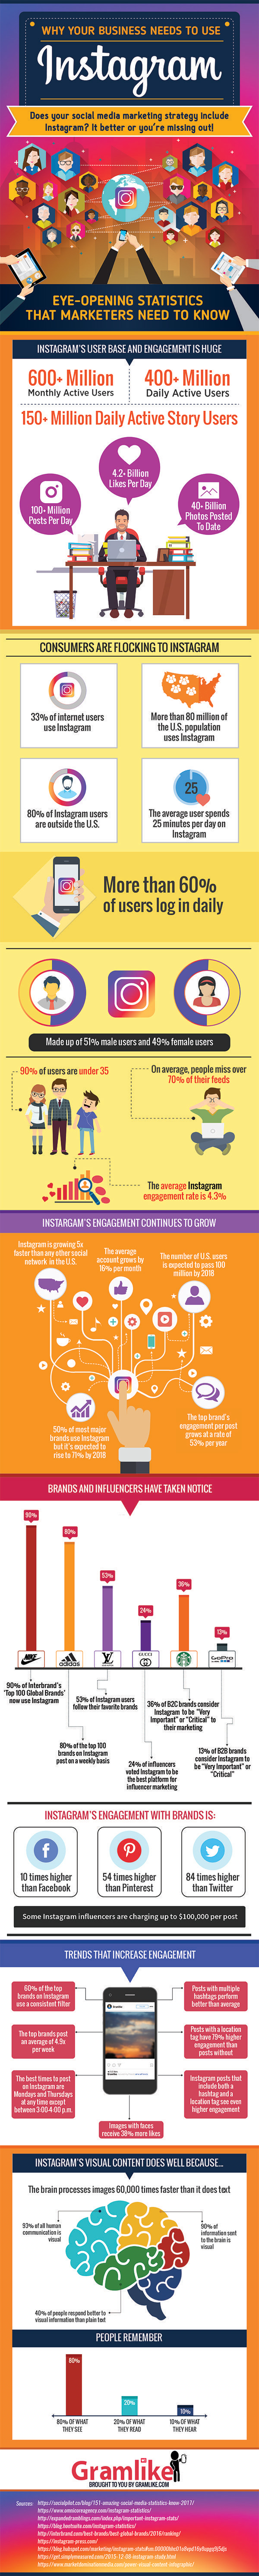 Instagram Needs to Be Part of Your Social Media Marketing Strategy